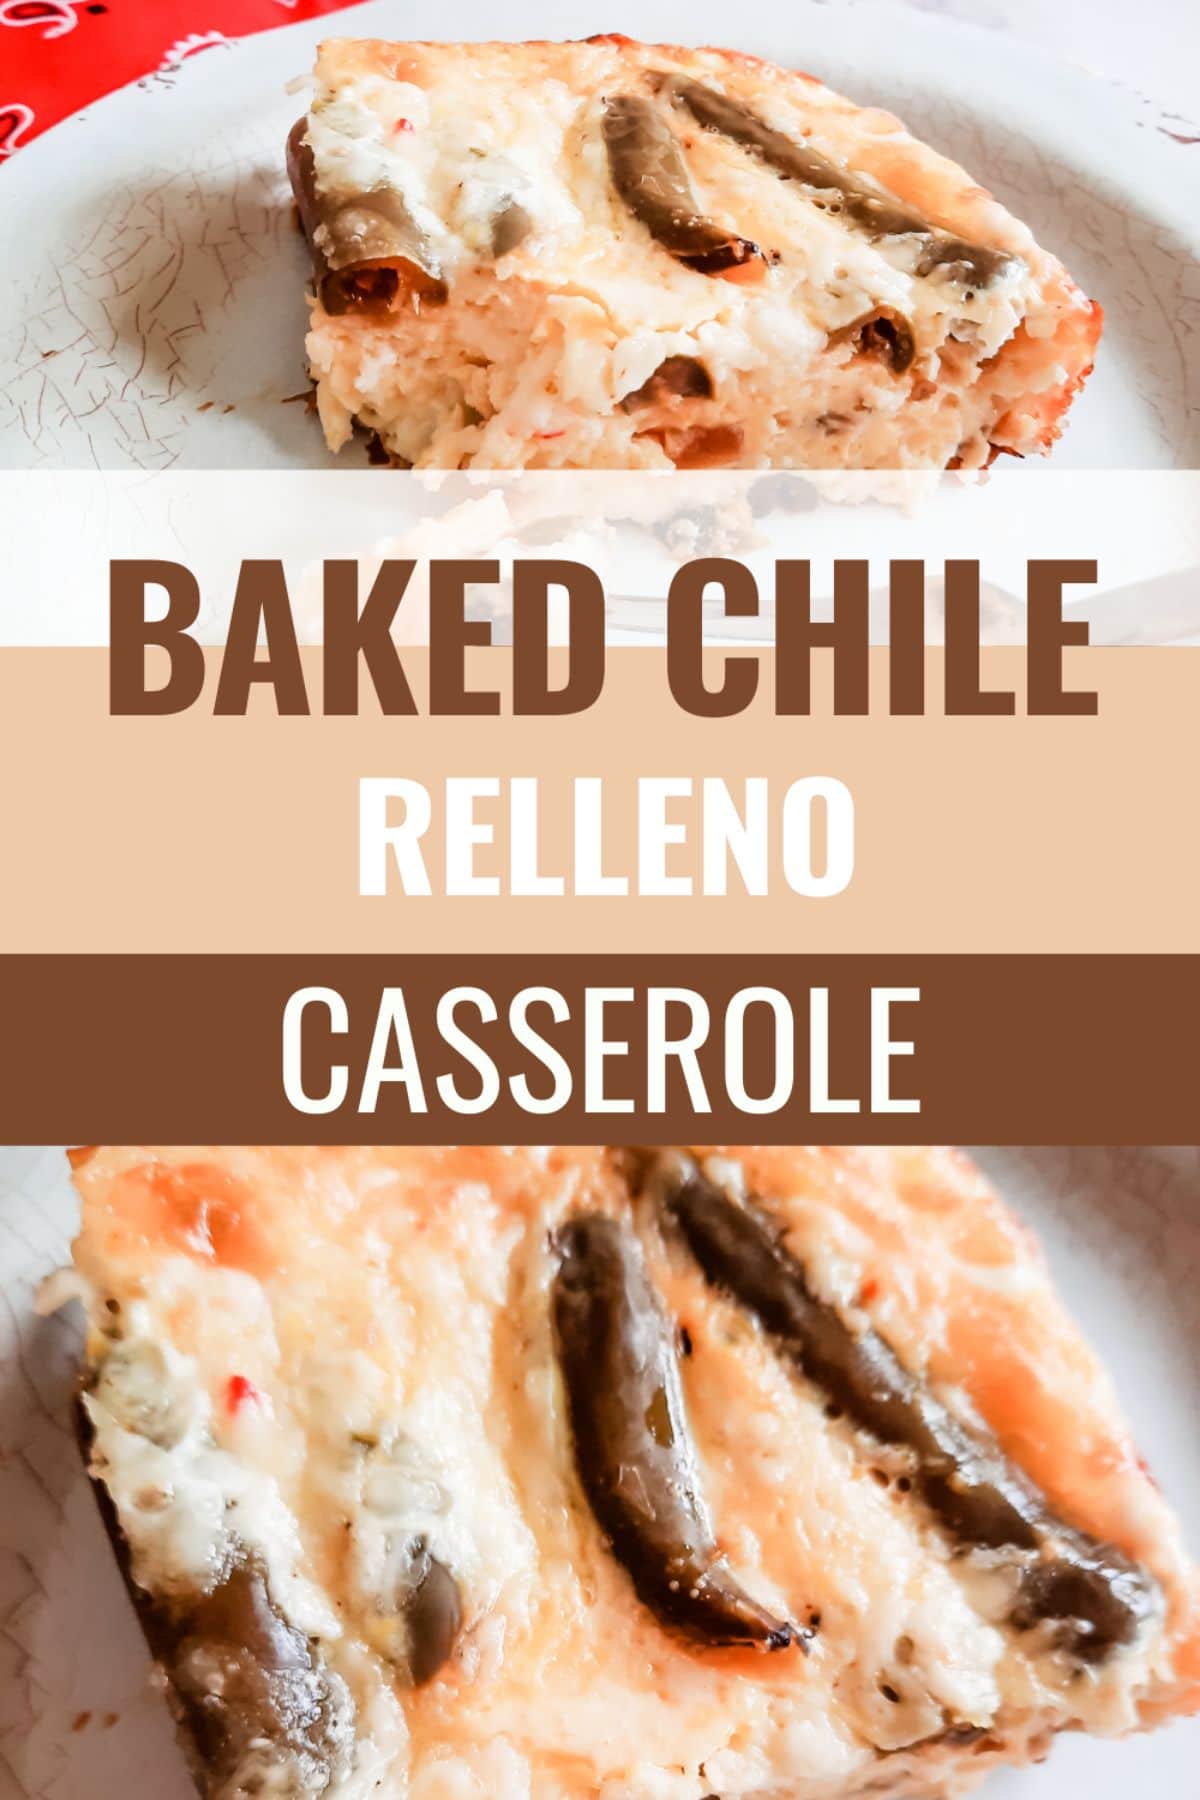 If you love flavorful casseroles, then this Baked Chile Relleno Casserole is a recipe that you are going to want to bake as soon as possible. #chilerelleno #casserole #mexicanfood #recipe via @wondermomwannab